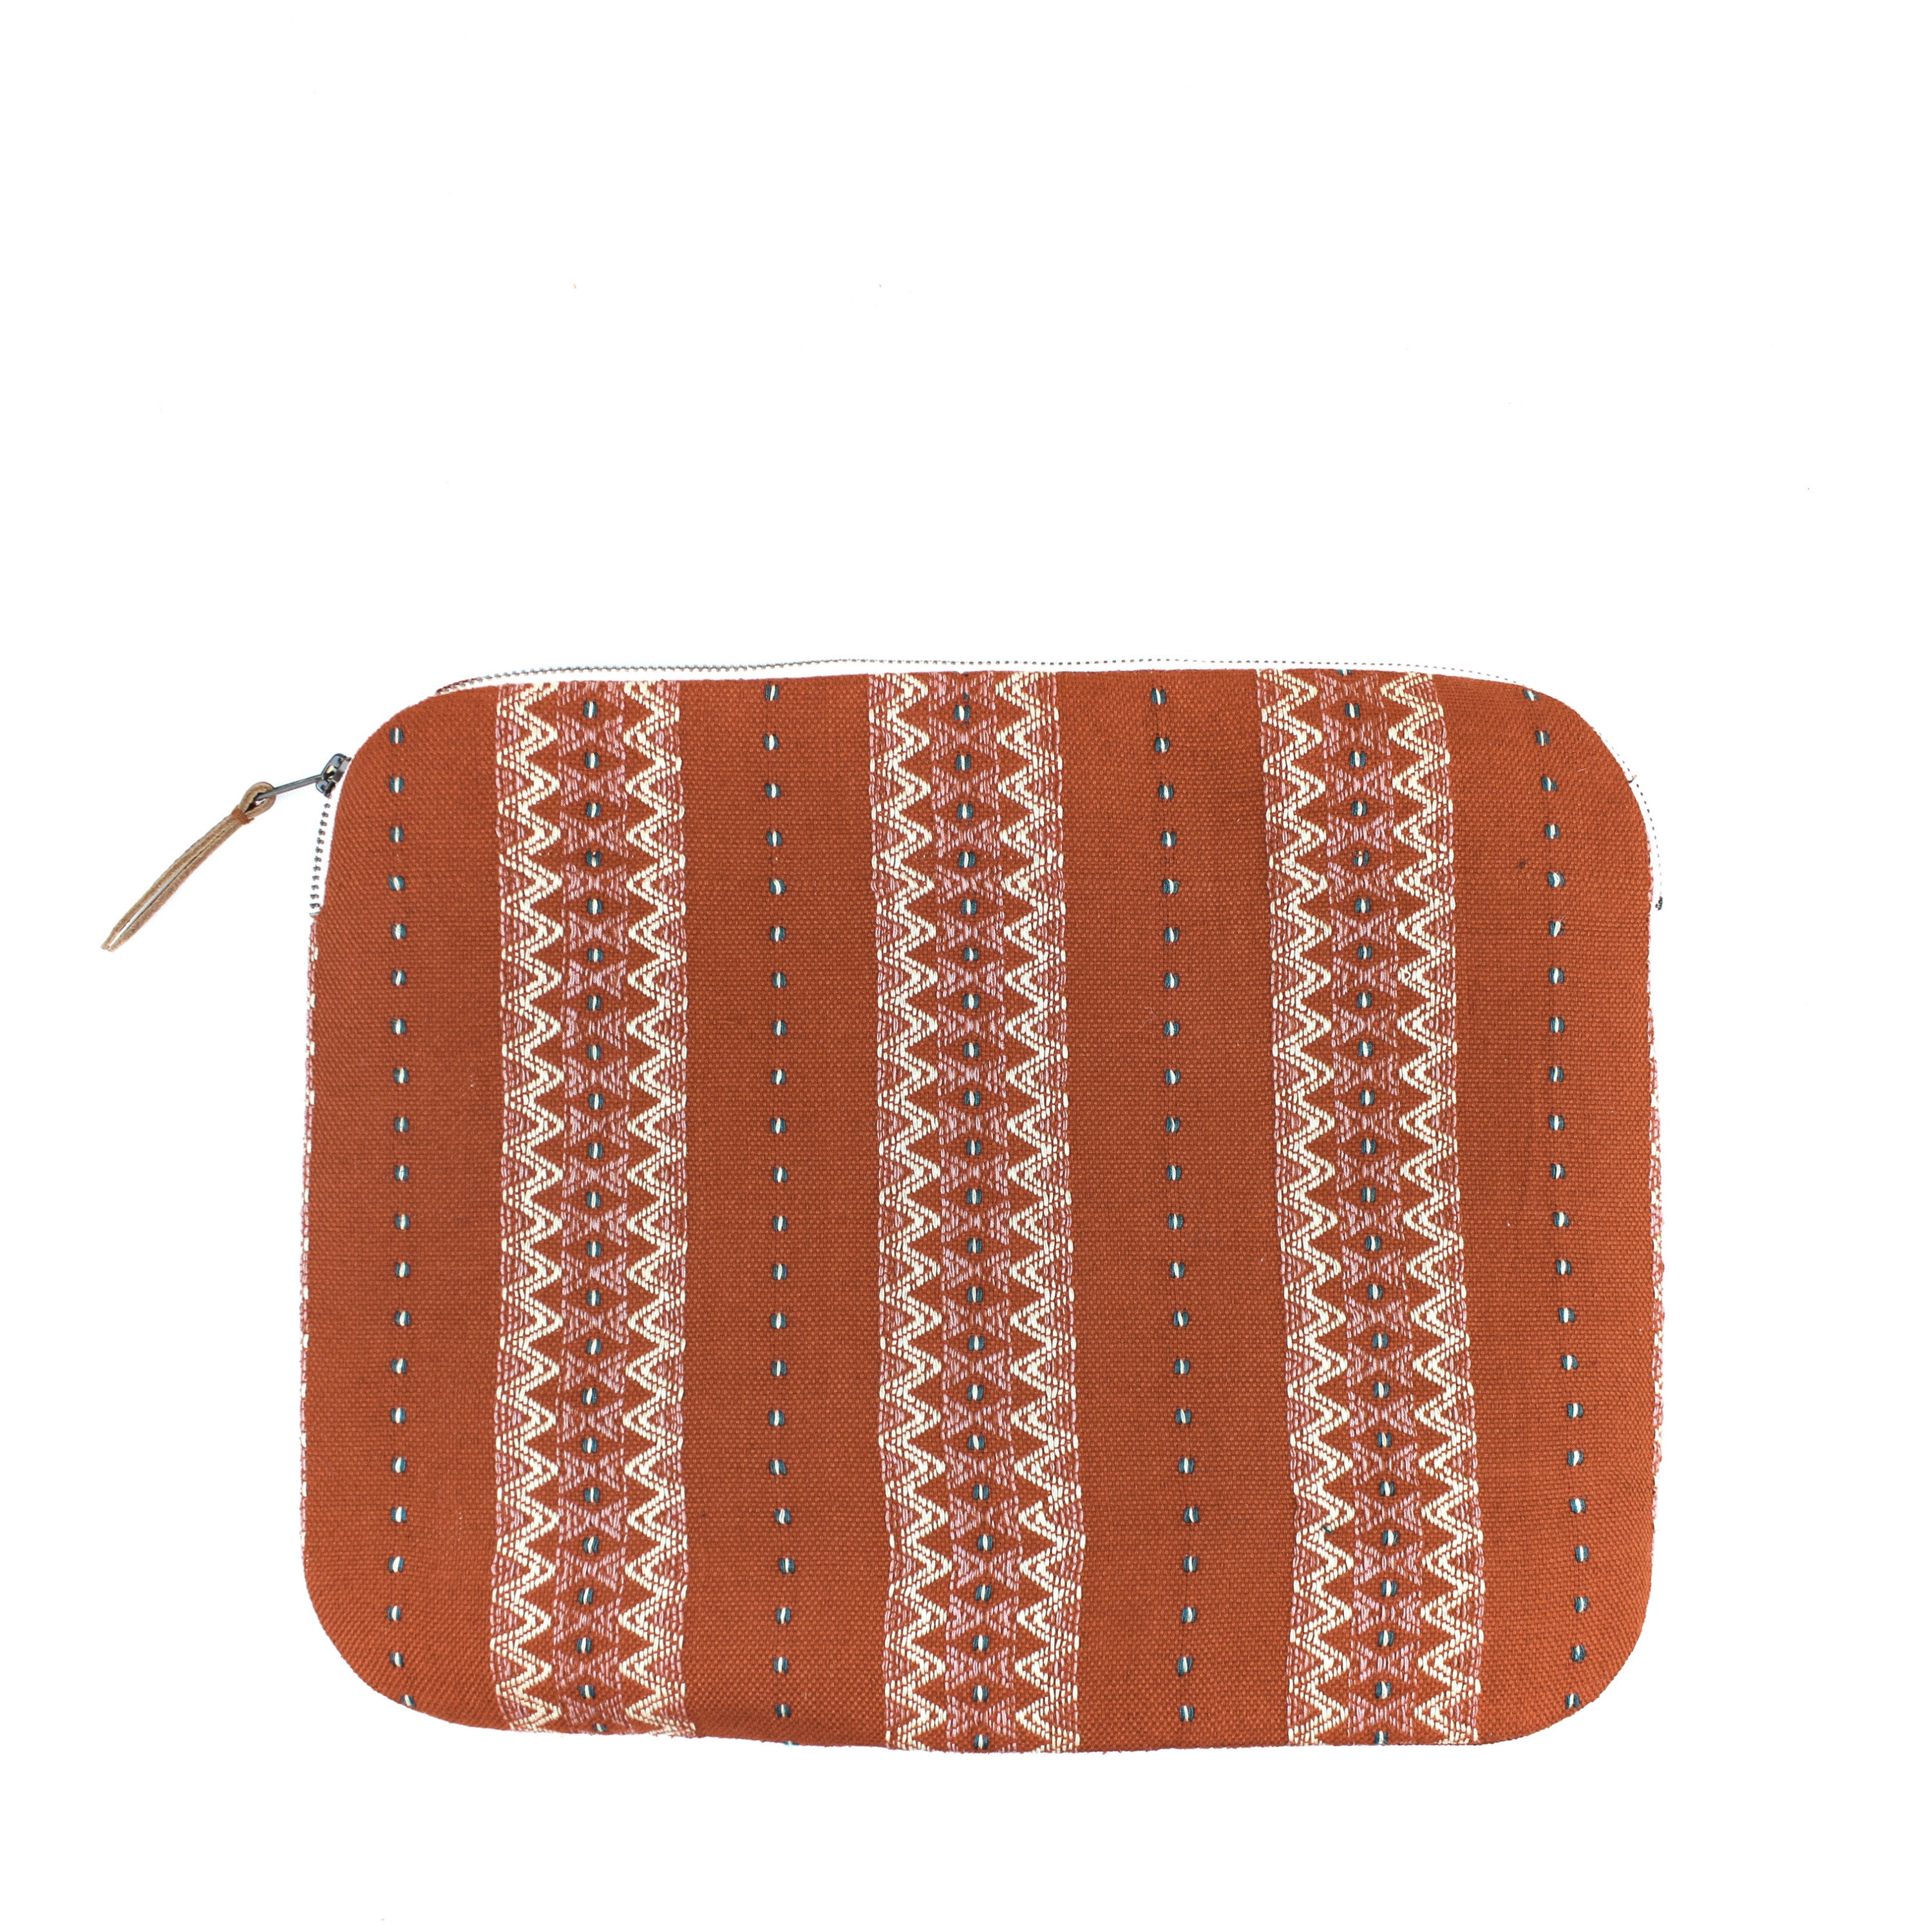 Cesia 16'' Hand woven artisan Ginger Laptop Case. The fabric has a zigzag white pattern over an orange background. It has a leather zipper pull.